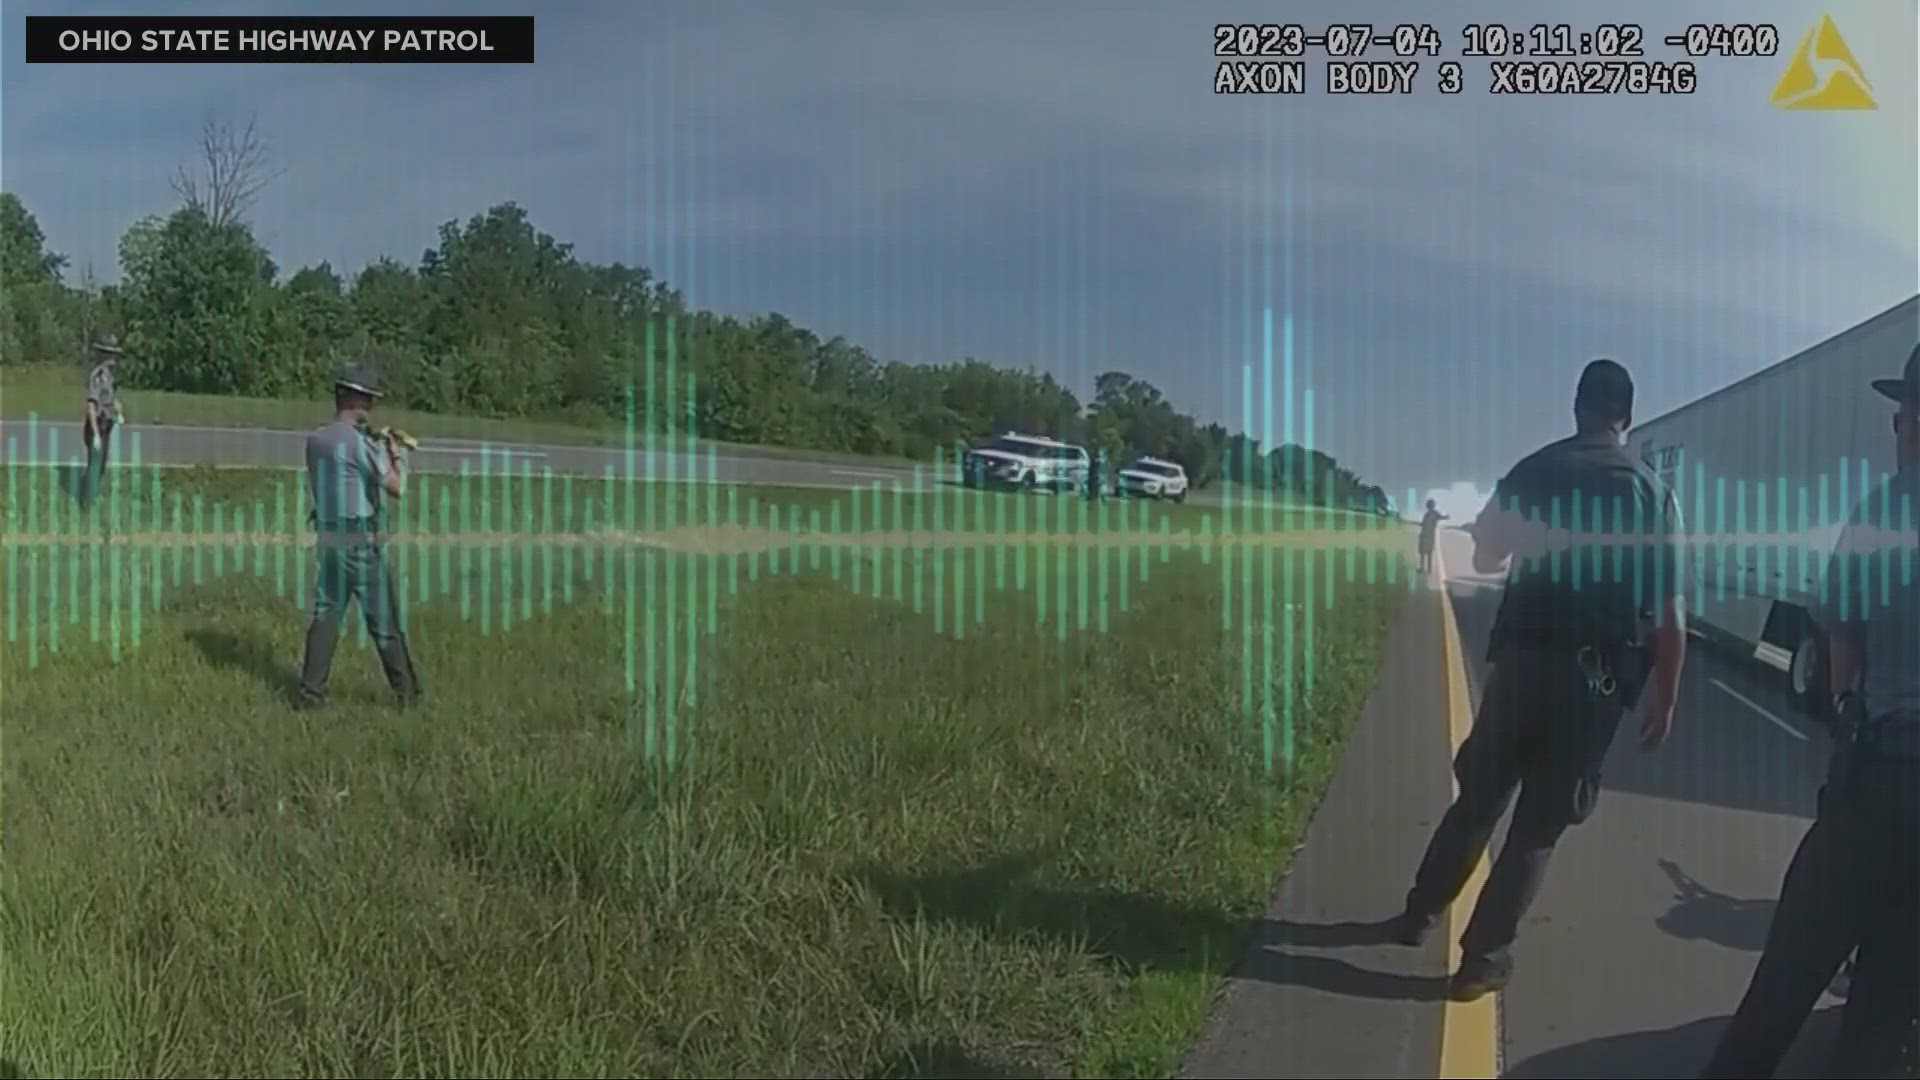 In body cam video from the scene, Ohio state troopers can be heard telling the officer with the K-9 to not release the dog.